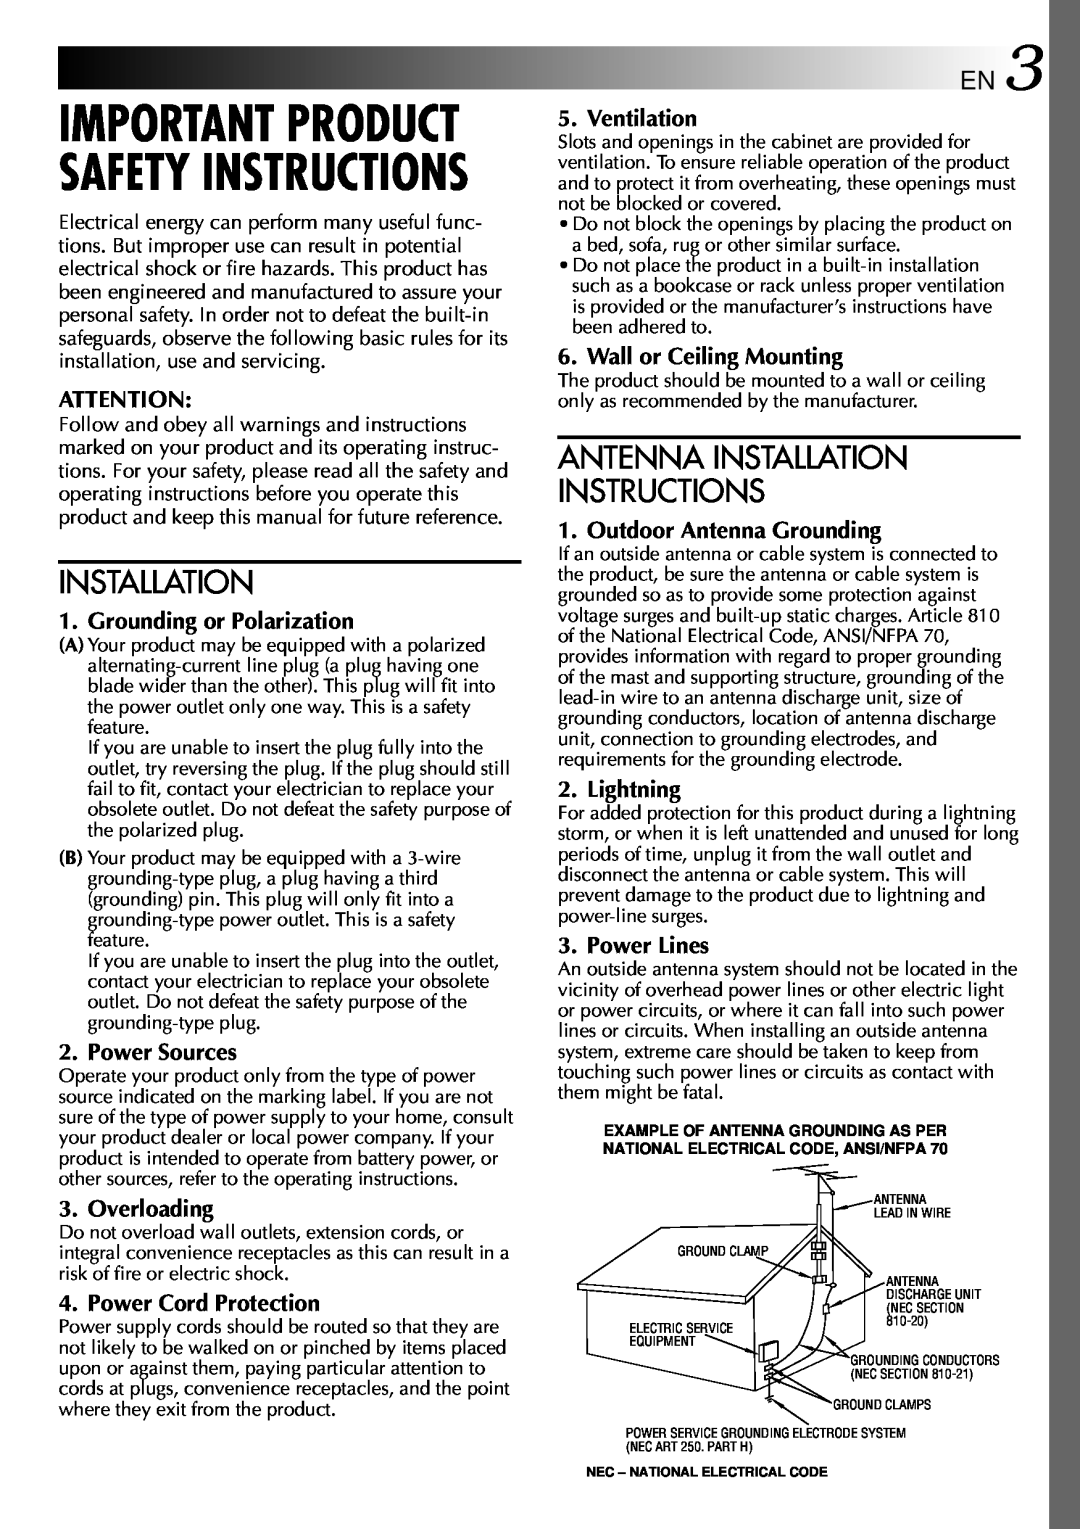 JVC GC-QX3 manual Antenna Installation Instructions, Important Product Safety Instructions 